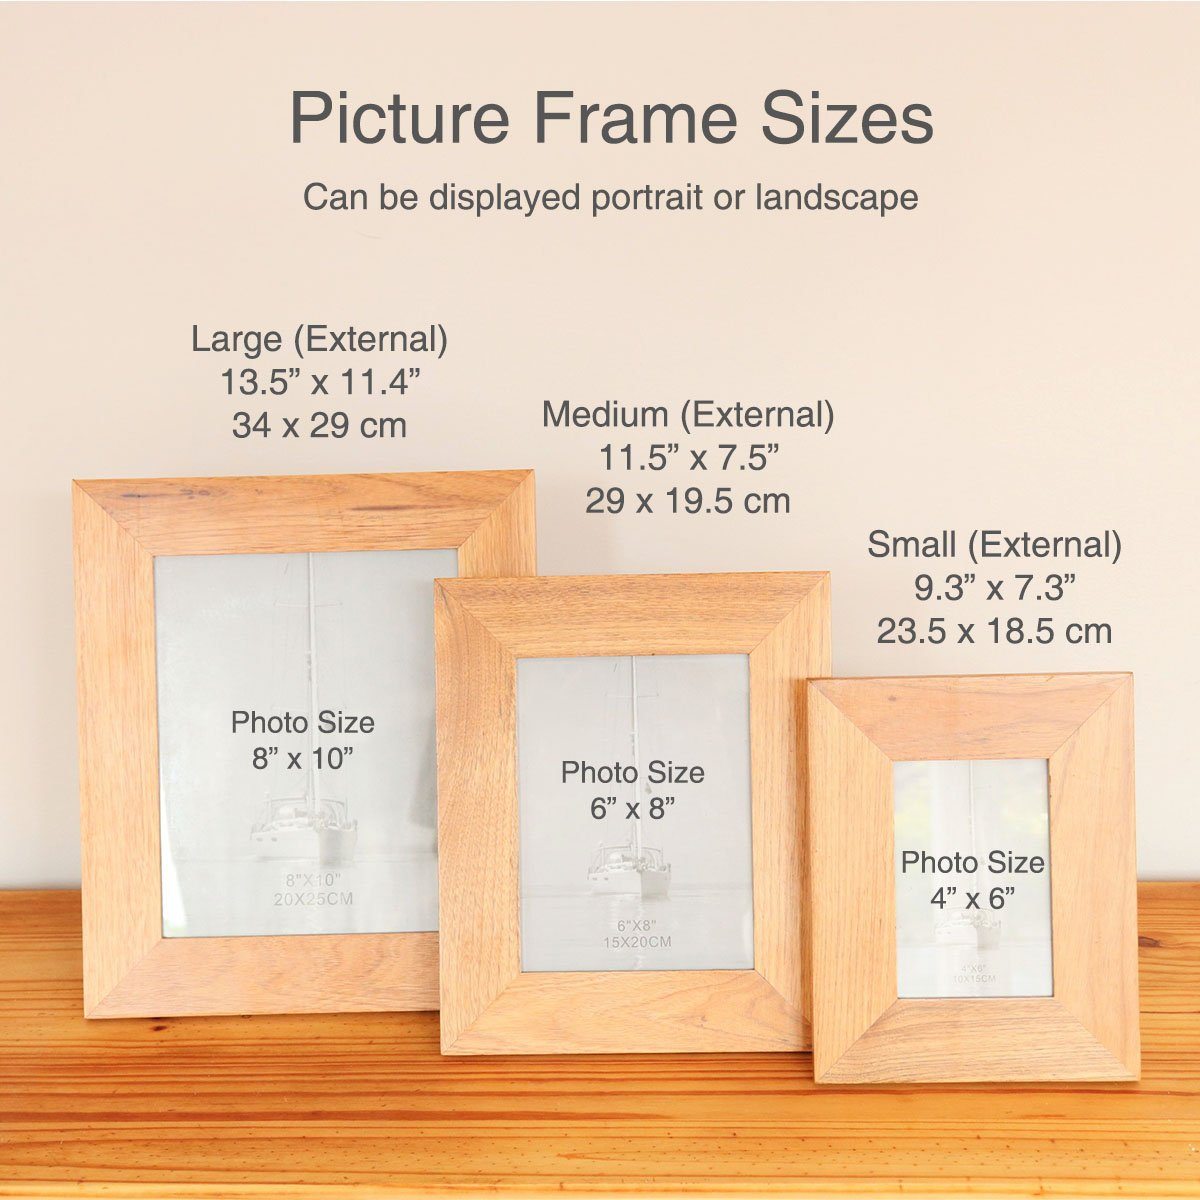 Photo Frame - Personalised Baby Photo Frame - Best Mummy Daddy Ever